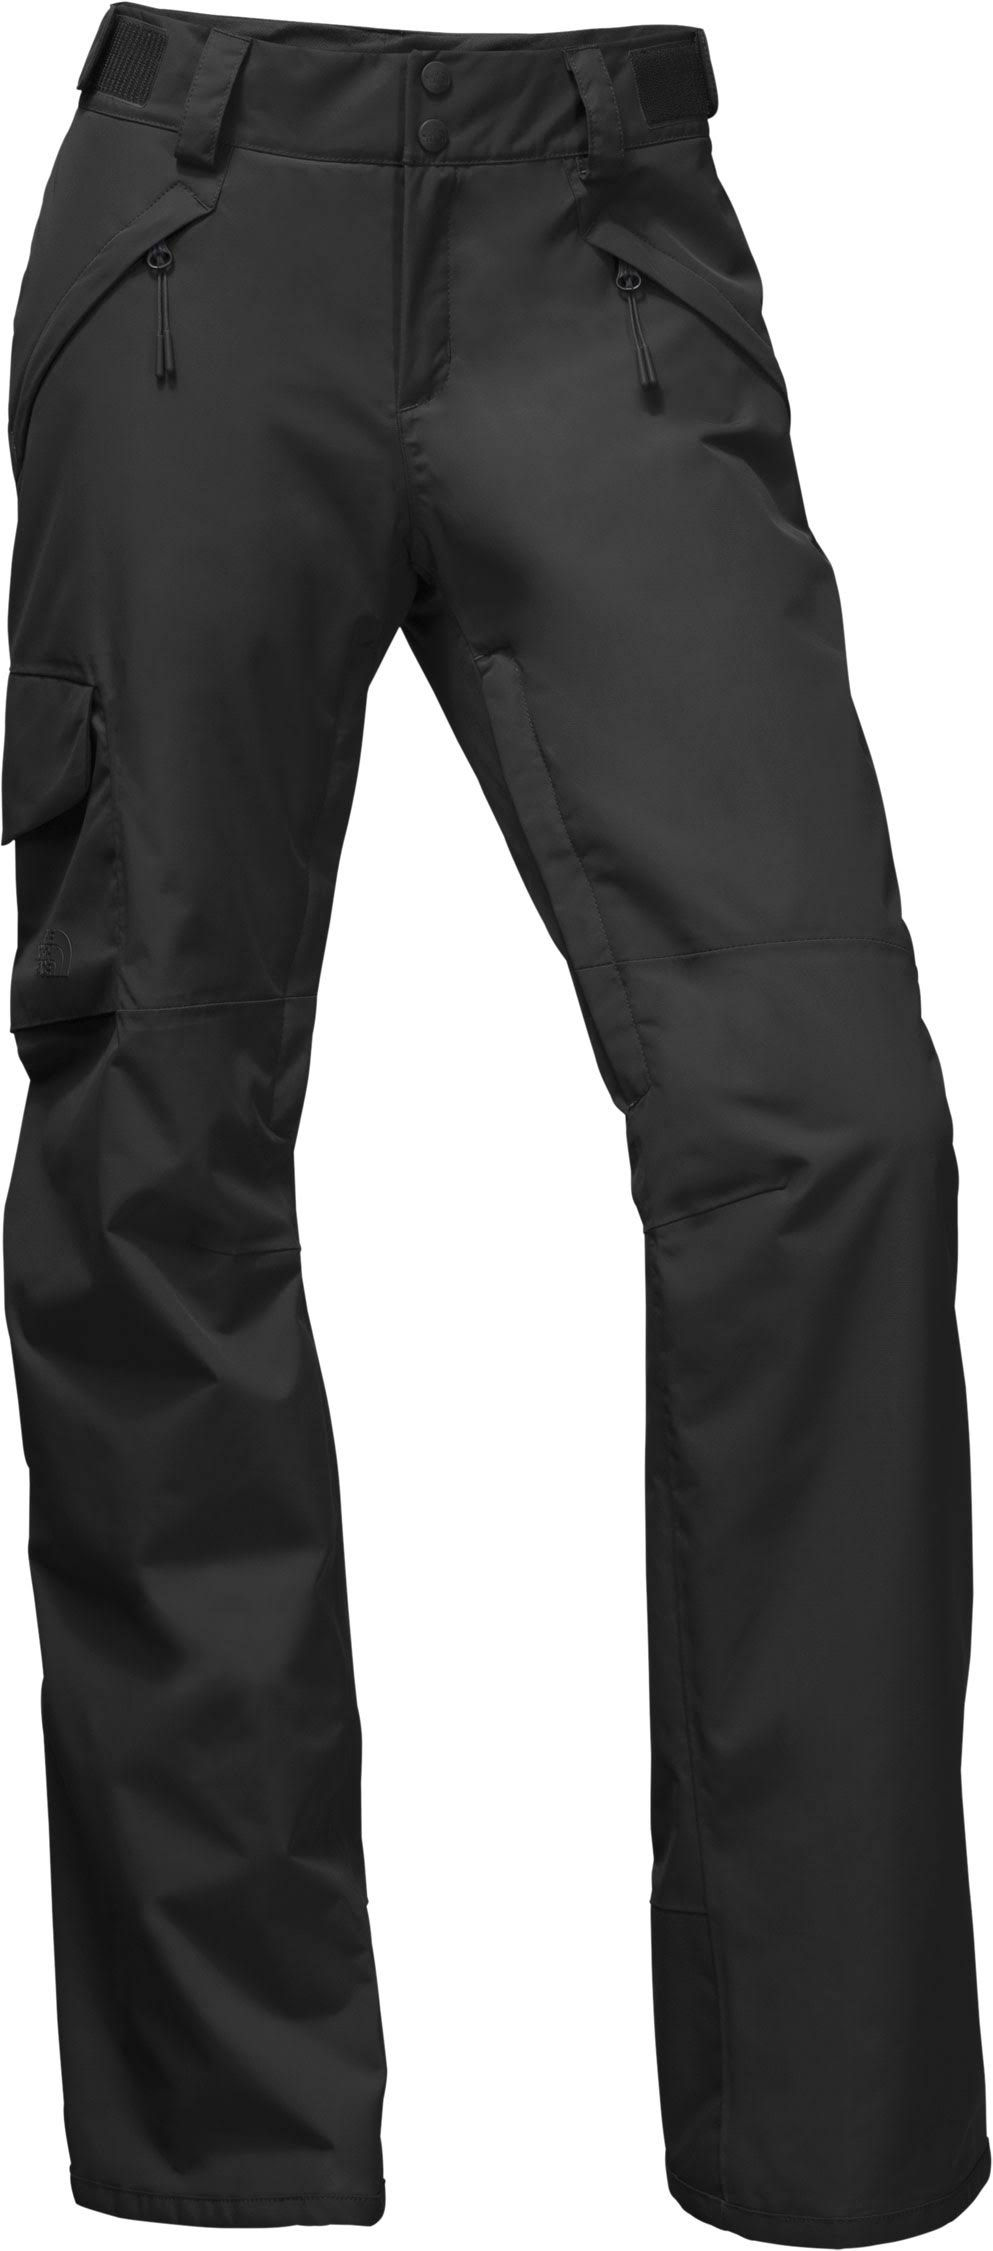 The North Face Freedom Insulated Ski Pant Women's, TNF Black, XS